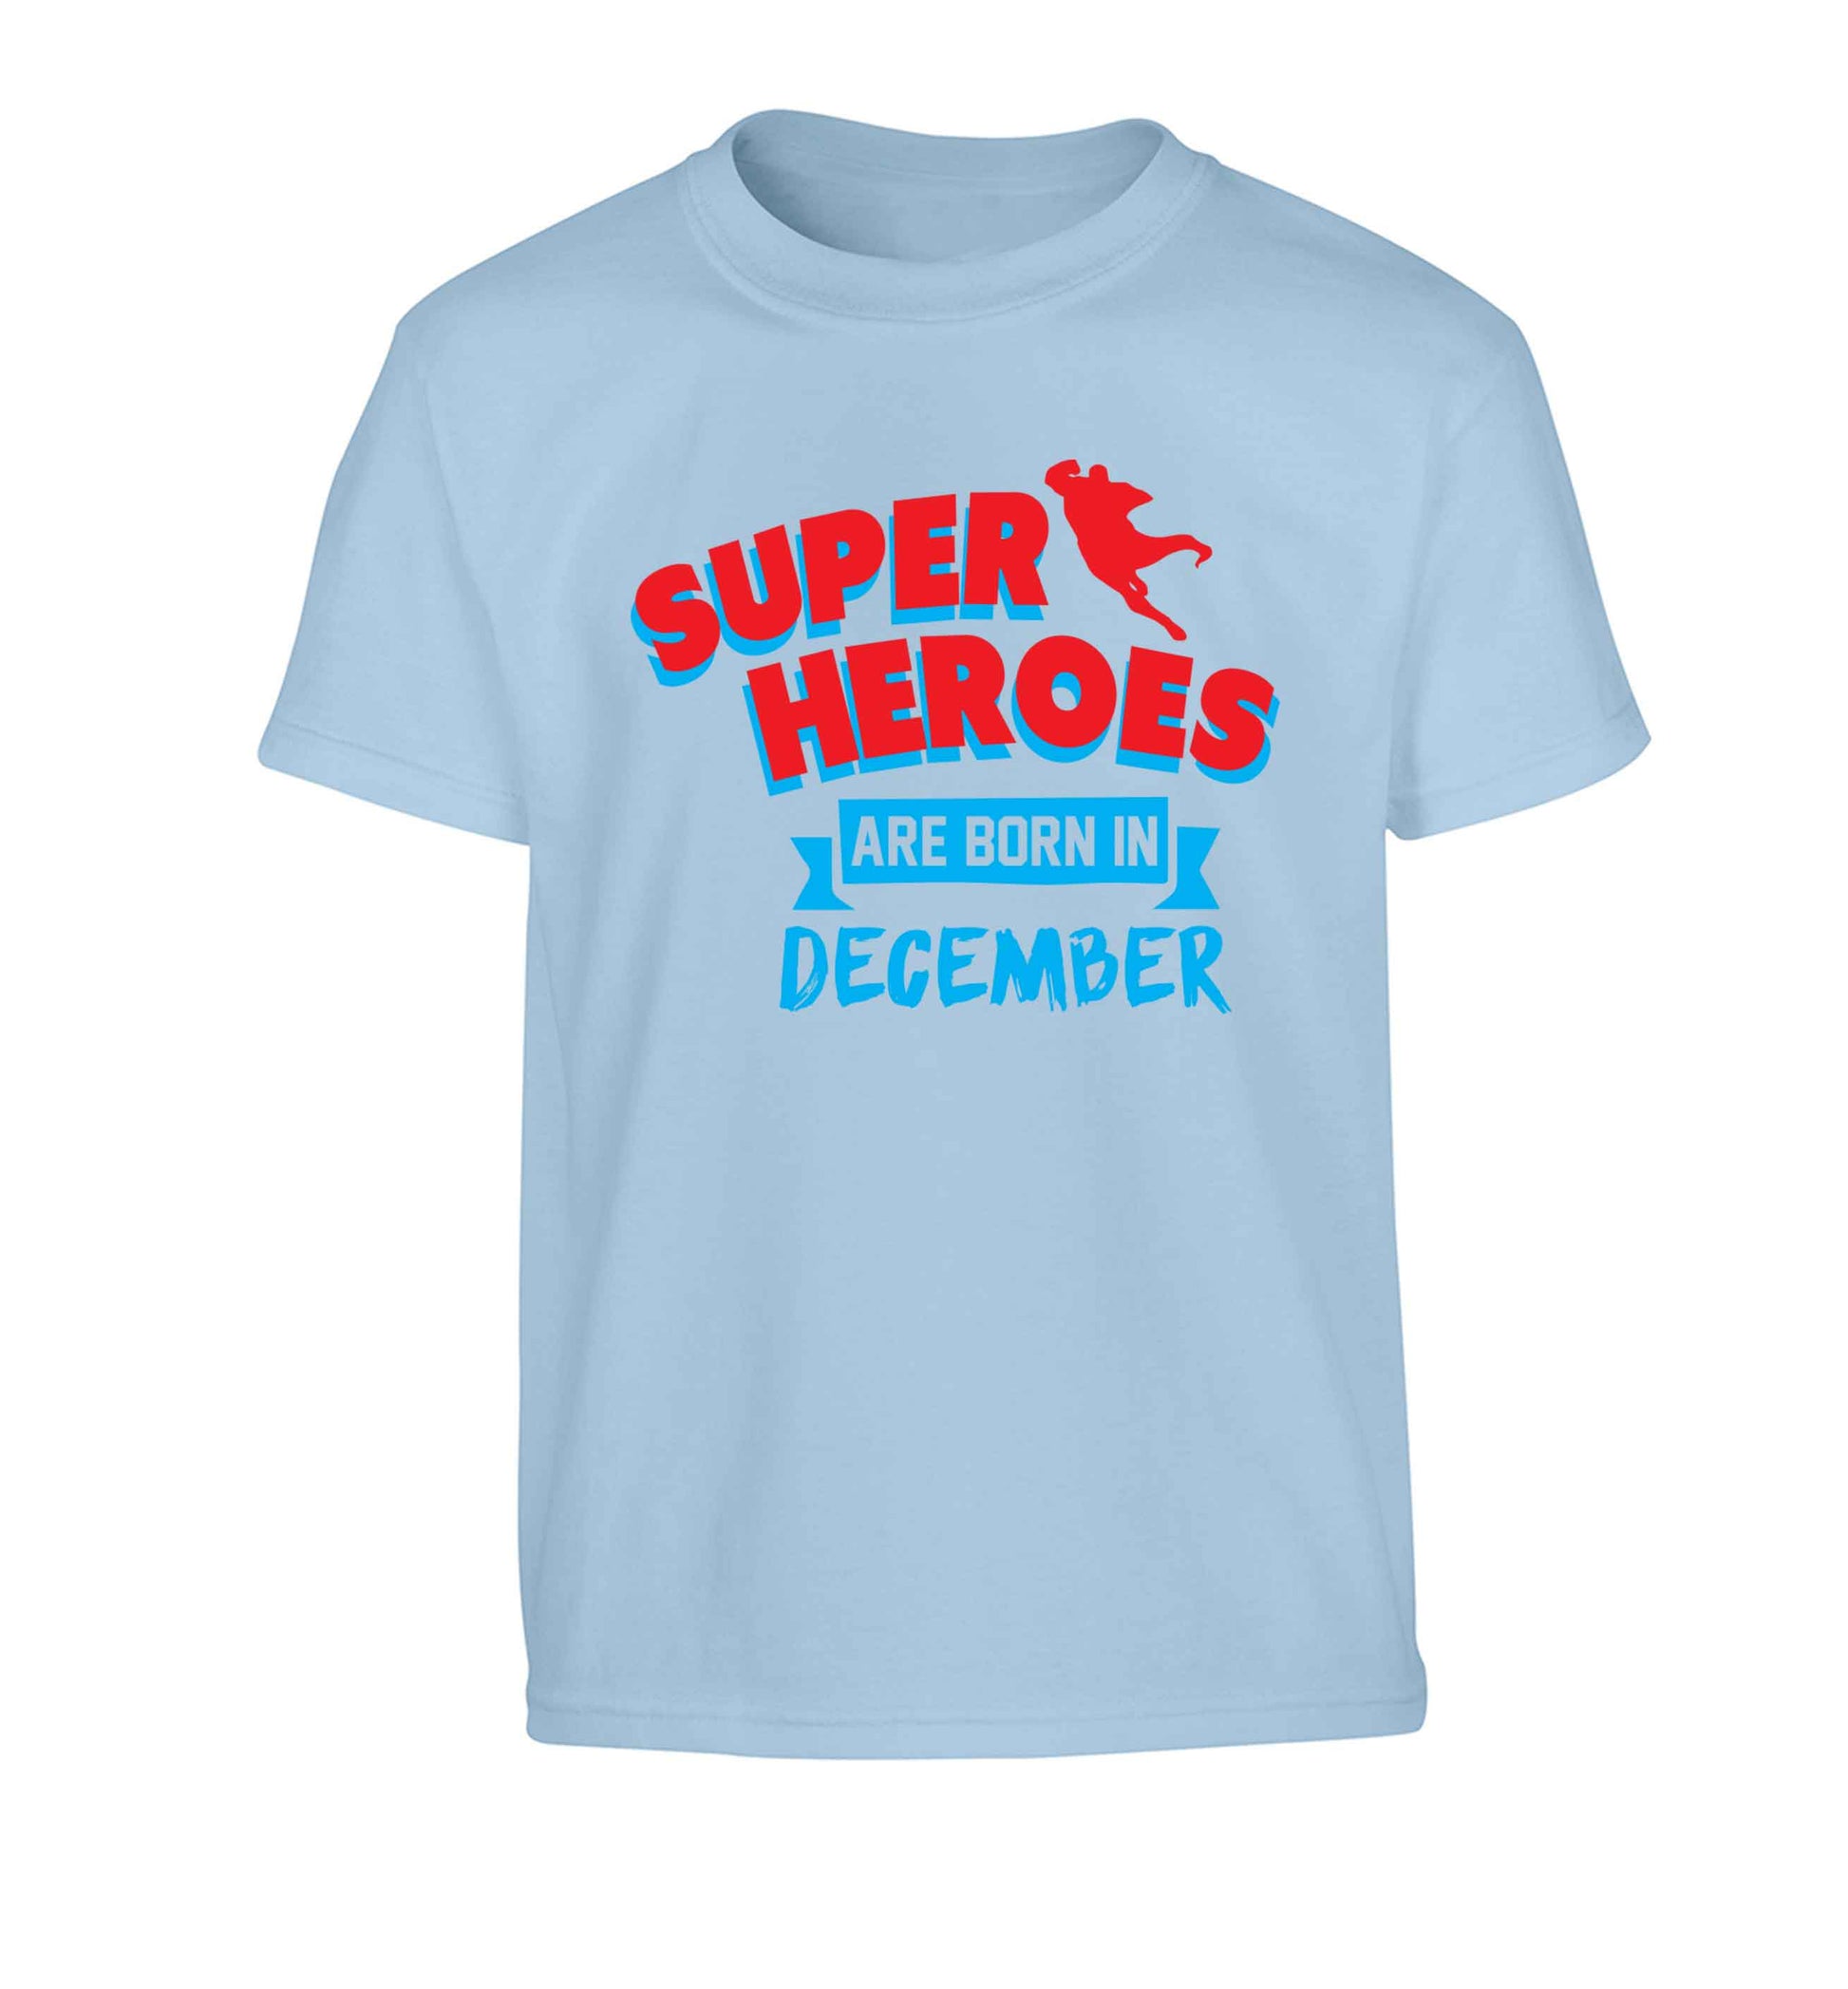 Superheroes are born in December Children's light blue Tshirt 12-13 Years